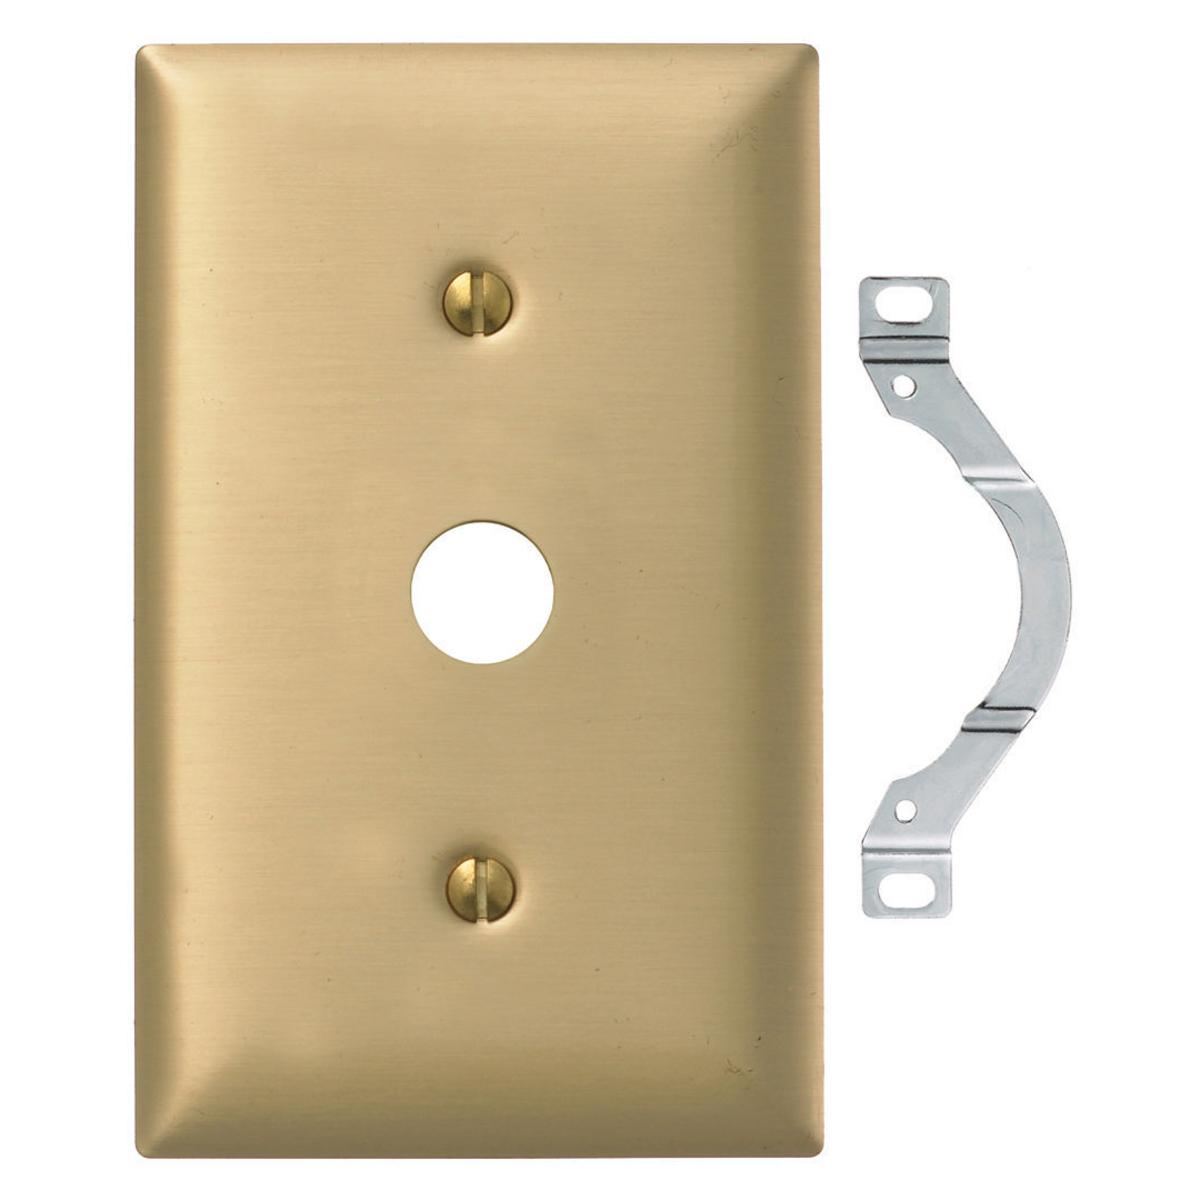 Hubbell SBP12 Wallplates and Boxes, Metallic Plates, 1- Gang, 1) .64" Opening, Standard Size, Brass Plated Steel  ; Non-magnetic and corrosion resistant ; Finish is lacquer coated to inhibit oxidation ; Protective plastic film helps to prevent scratches and damage ; Pr